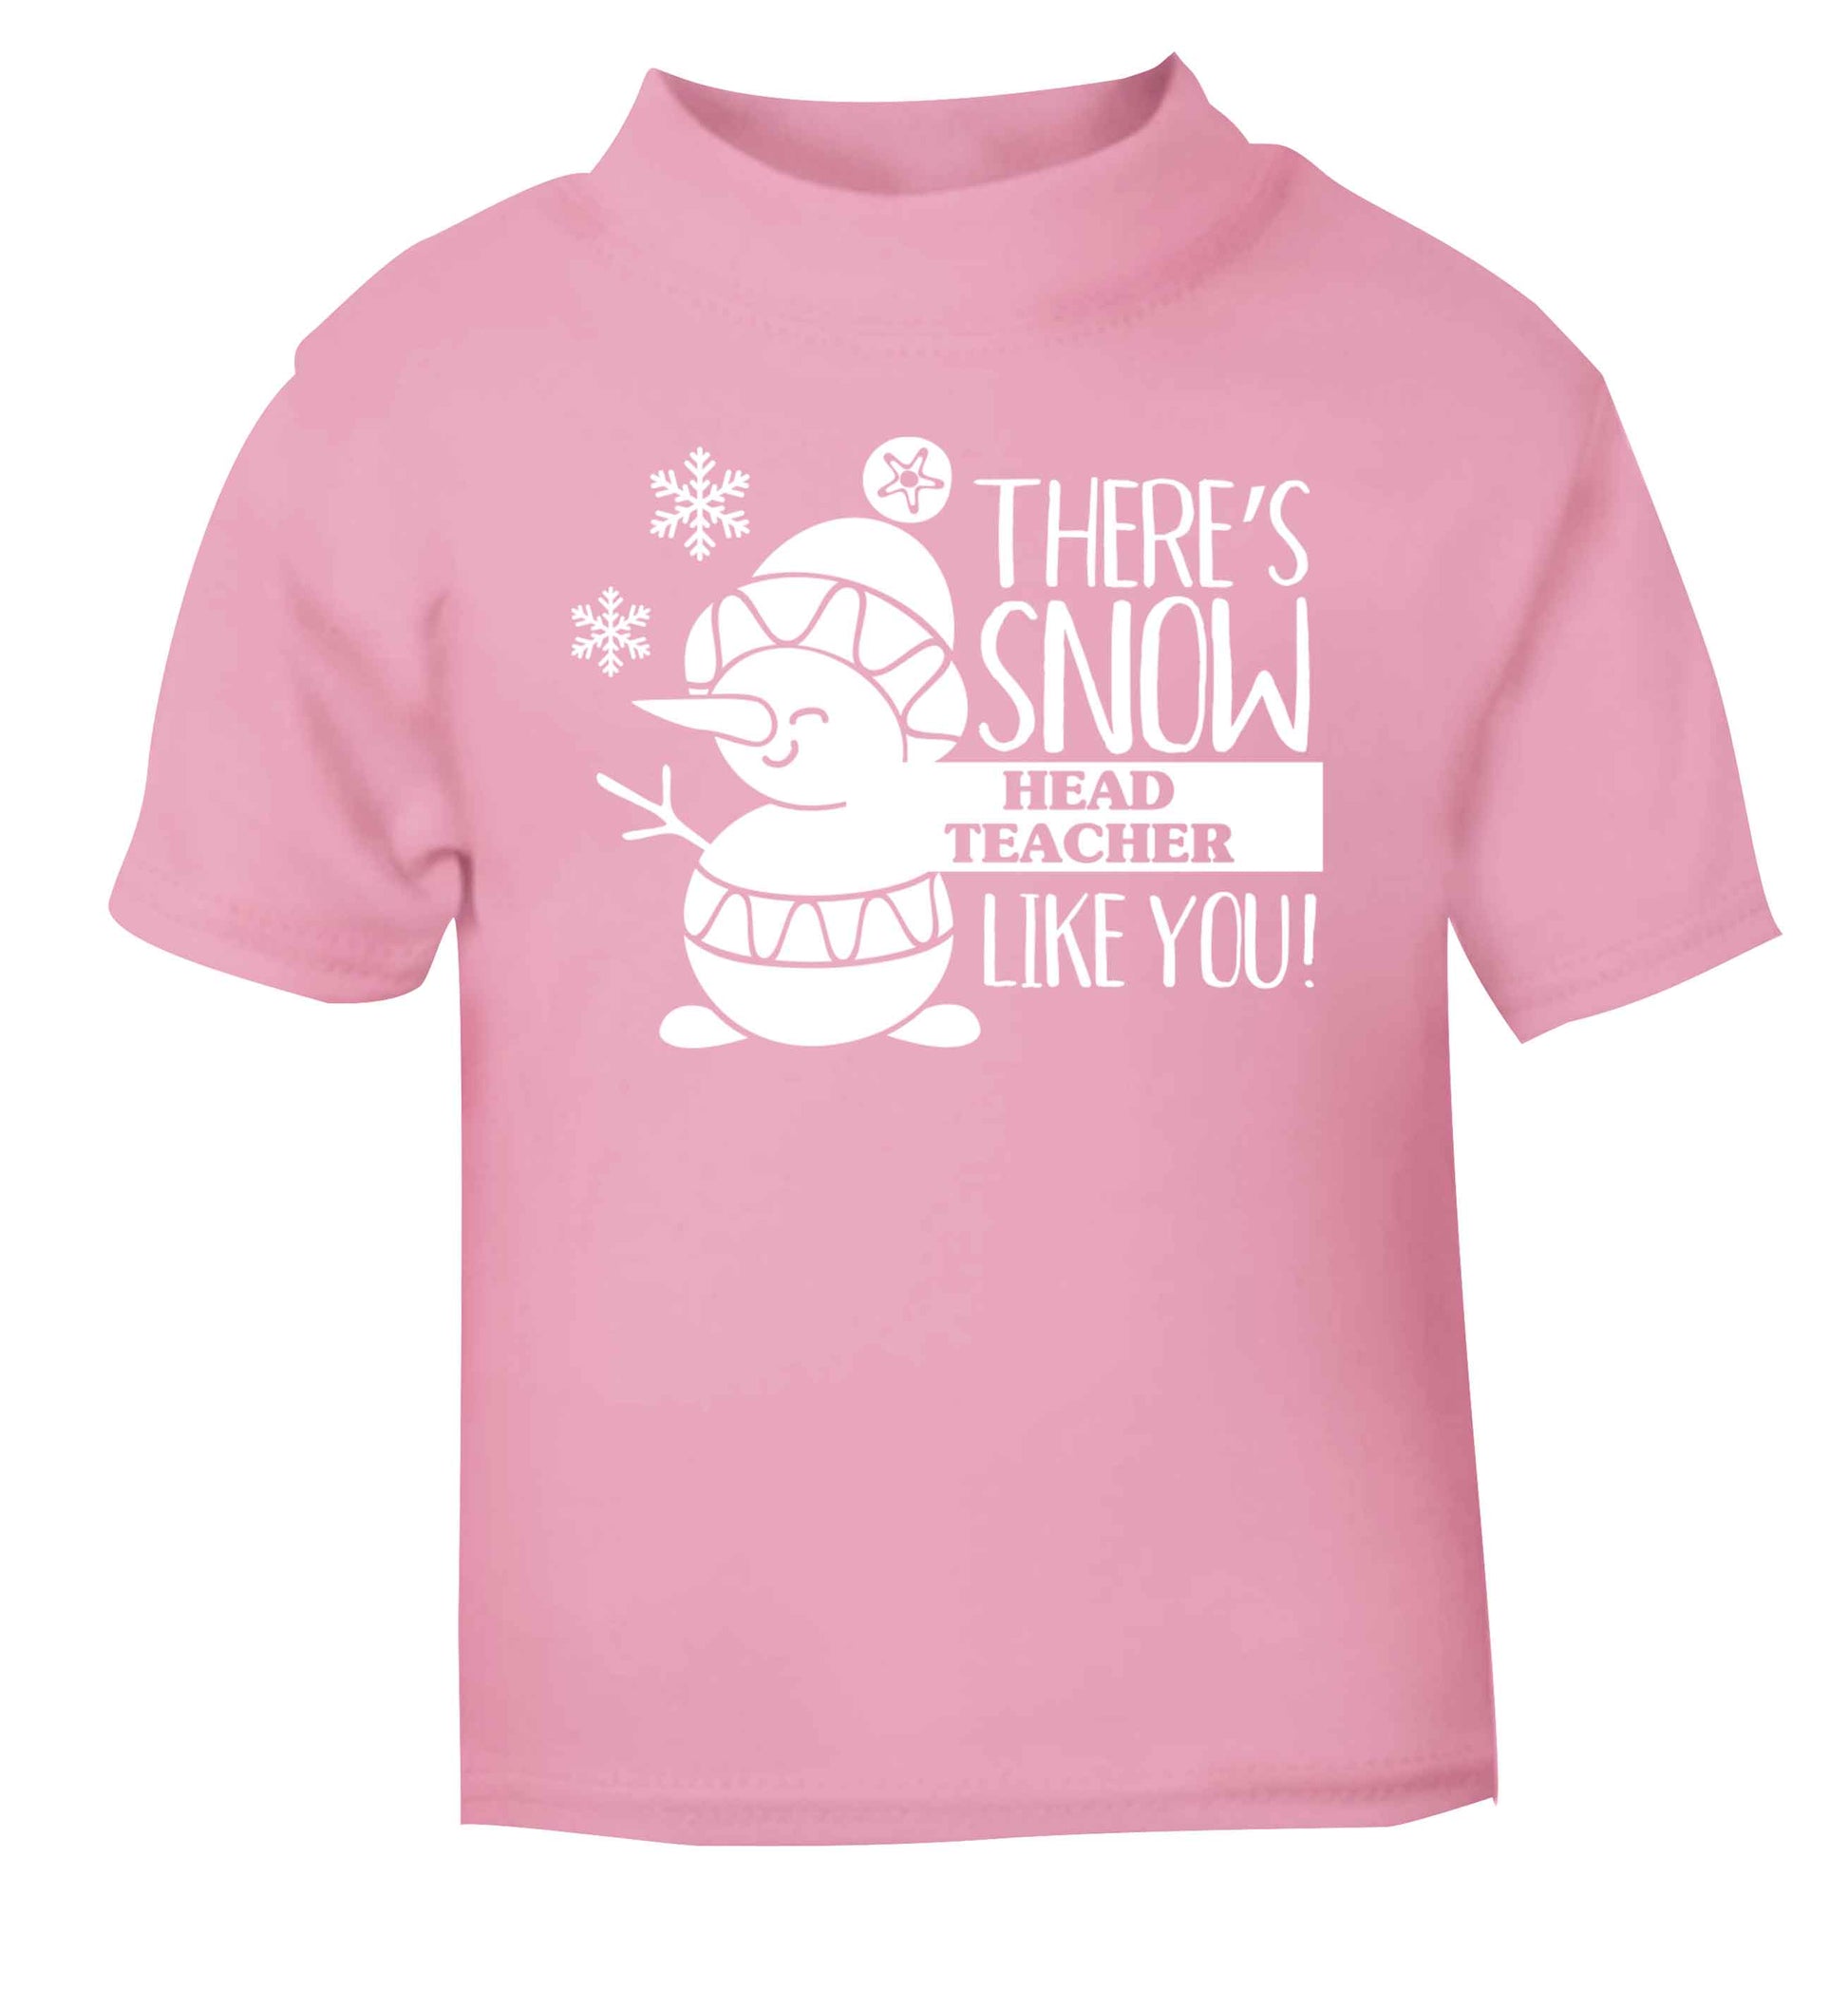 There's snow head teacher like you light pink baby toddler Tshirt 2 Years